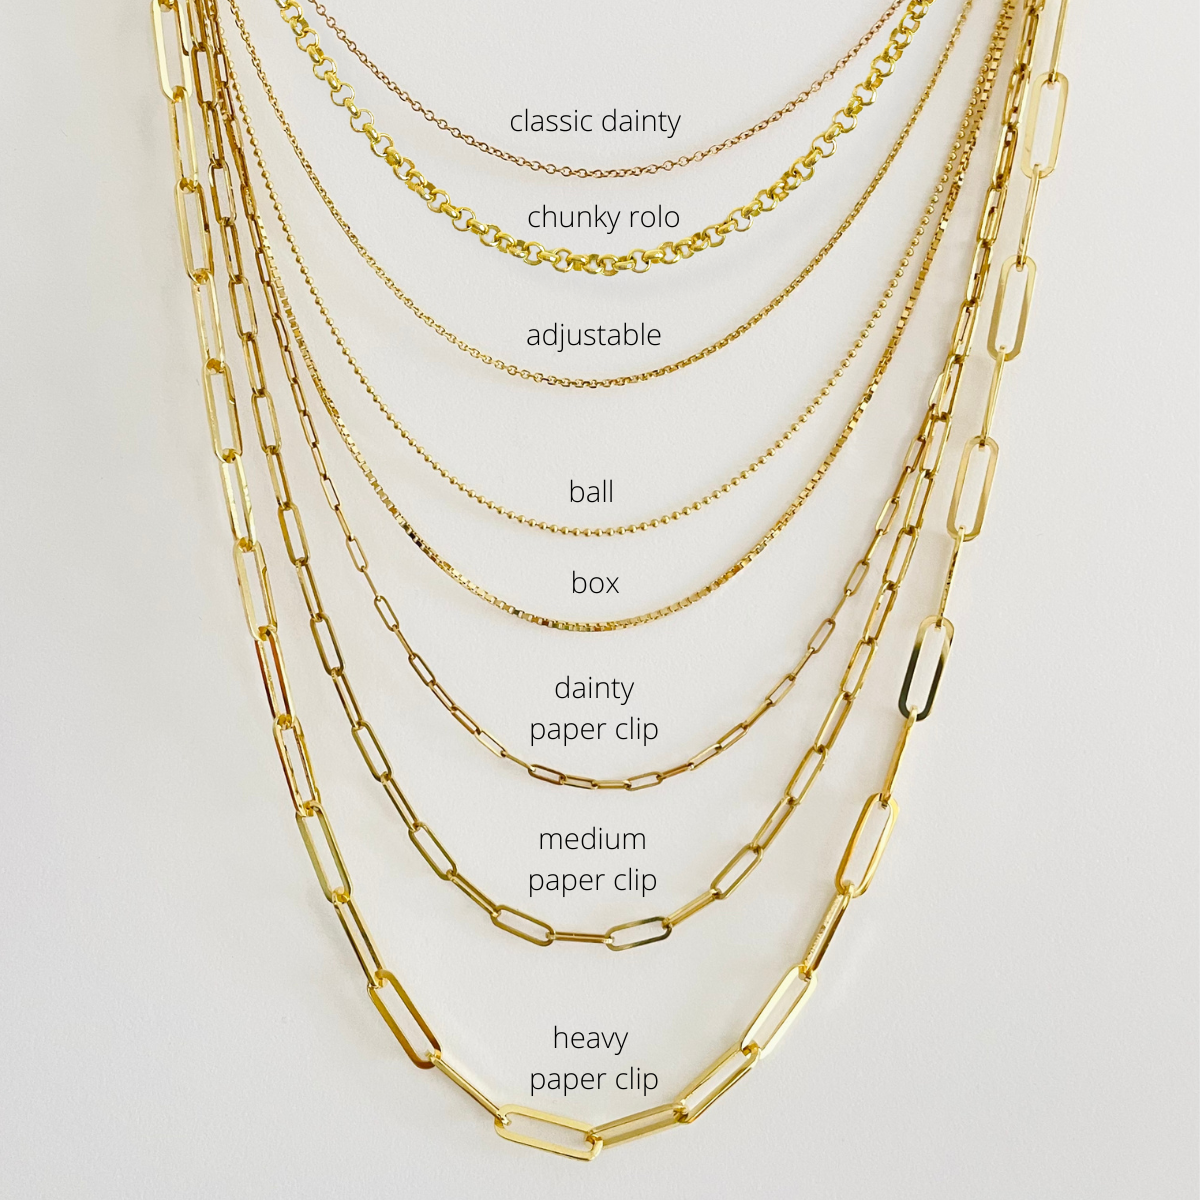 The Paperclip Chain - Dainty Weight